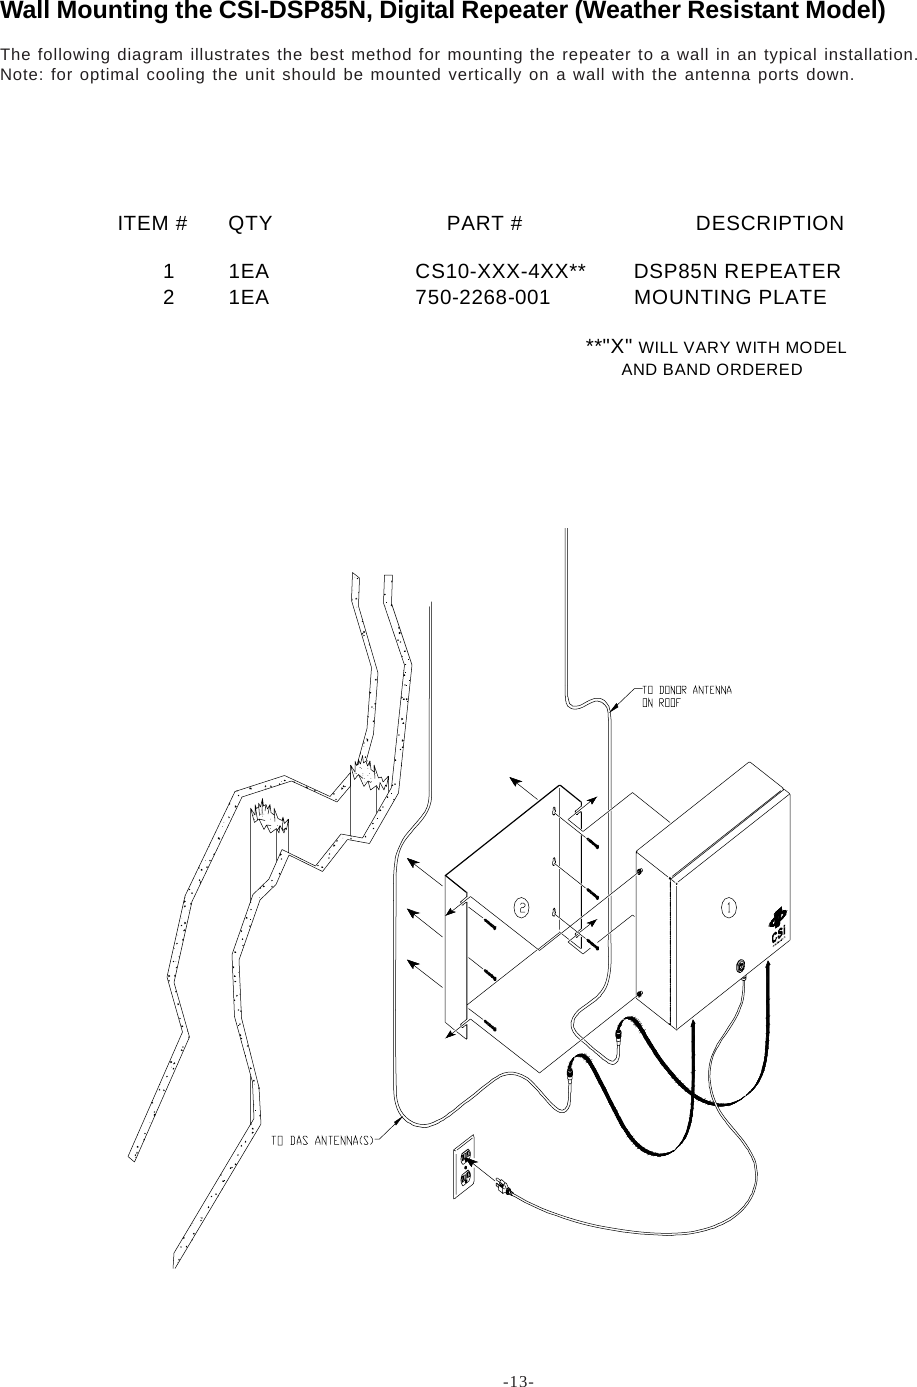 -13-The following diagram illustrates the best method for mounting the repeater to a wall in an typical installation.Note: for optimal cooling the unit should be mounted vertically on a wall with the antenna ports down.ITEM # QTY PART # DESCRIPTION  1 1EA CS10-XXX-4XX** DSP85N REPEATER  2 1EA 750-2268-001 MOUNTING PLATE                                                                                **&quot;X&quot; WILL VARY WITH MODELAND BAND ORDEREDWall Mounting the CSI-DSP85N, Digital Repeater (Weather Resistant Model)